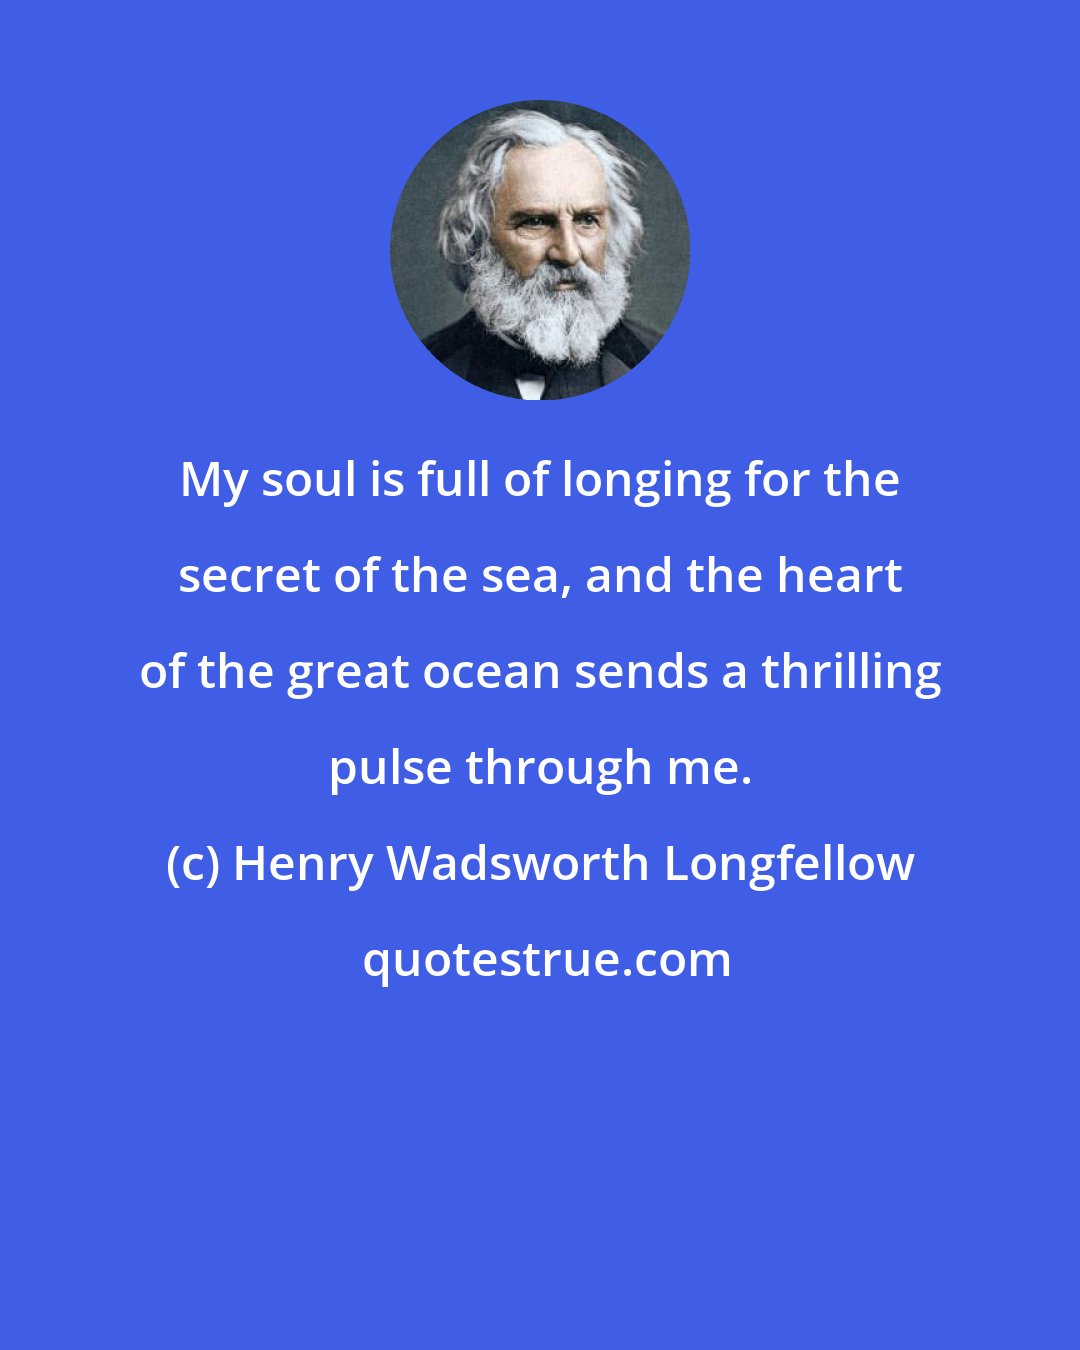 Henry Wadsworth Longfellow: My soul is full of longing for the secret of the sea, and the heart of the great ocean sends a thrilling pulse through me.